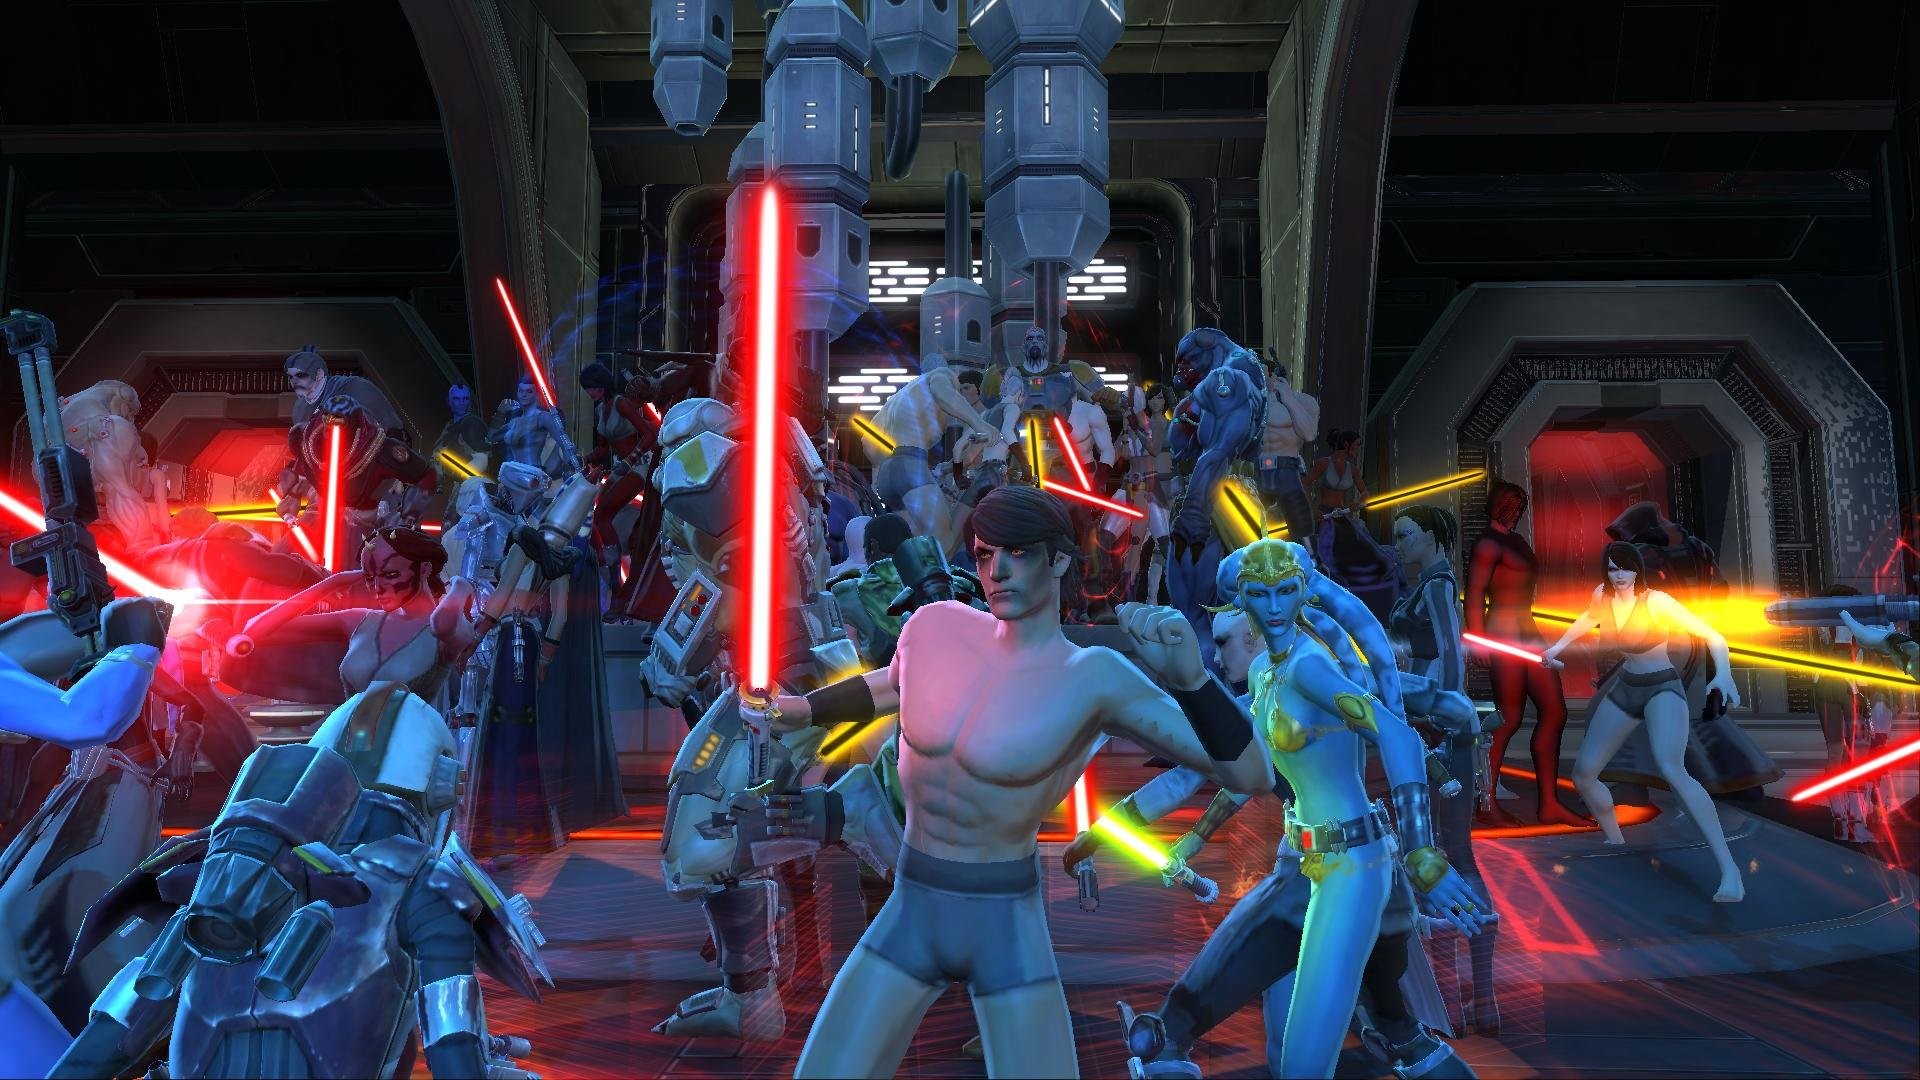 1920x1080 STAR WARS OLD REPUBLIC mmo rpg swtor fighting sci-fi wallpaper |   | 518846 | WallpaperUP